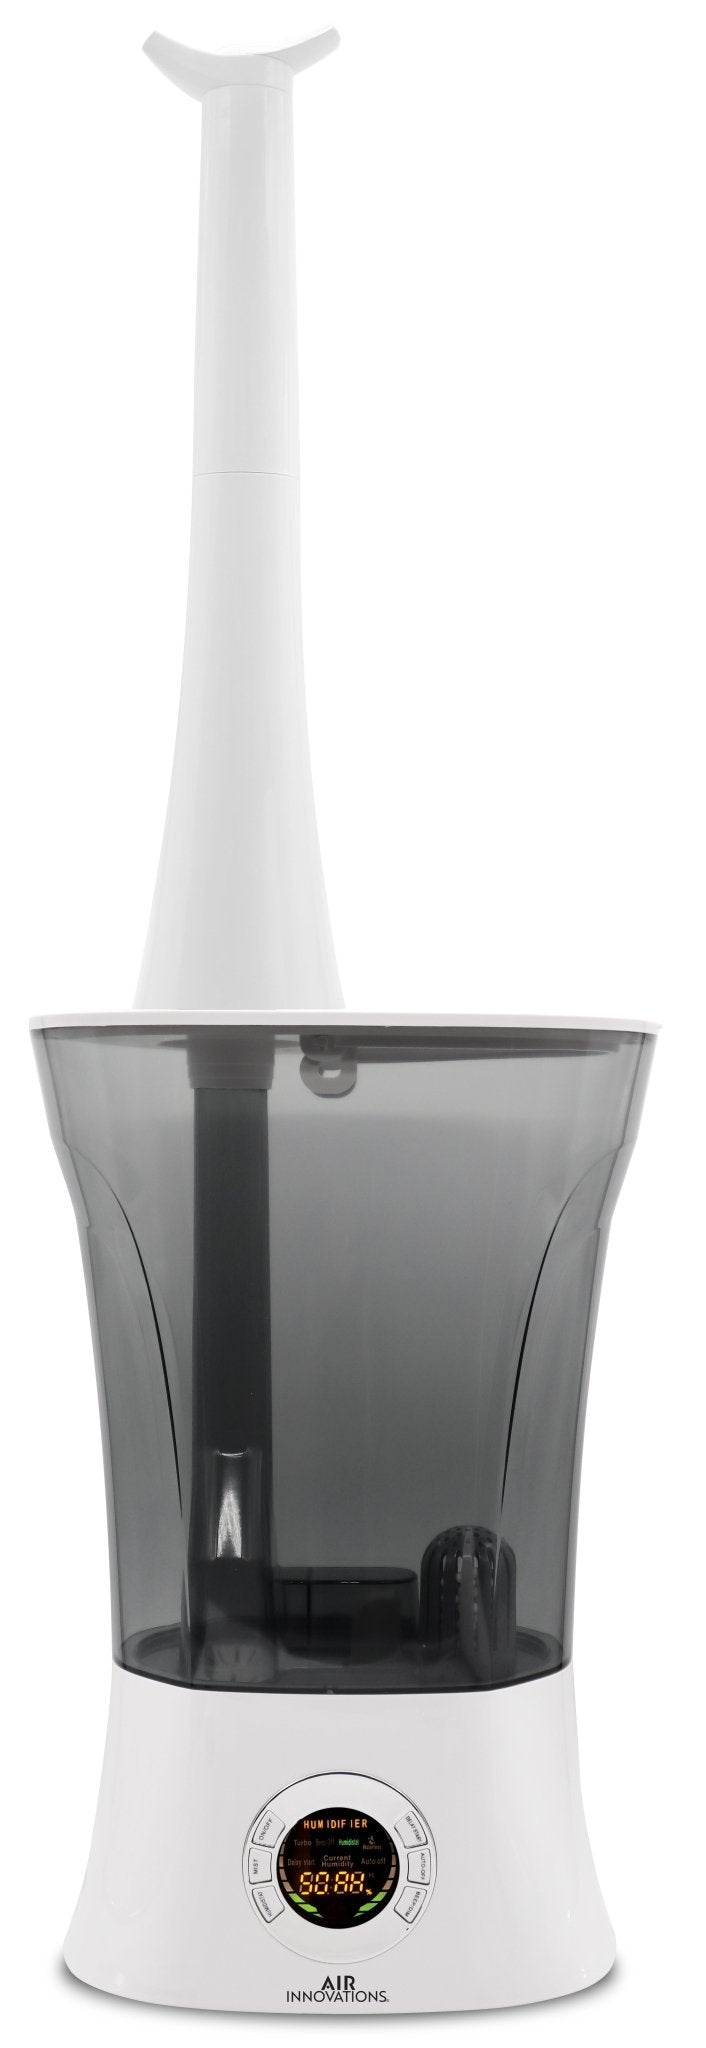 Air Innovations MH-908 Ultrasonic Cool Mist Humidifier With Aromatherapy - Air Innovations